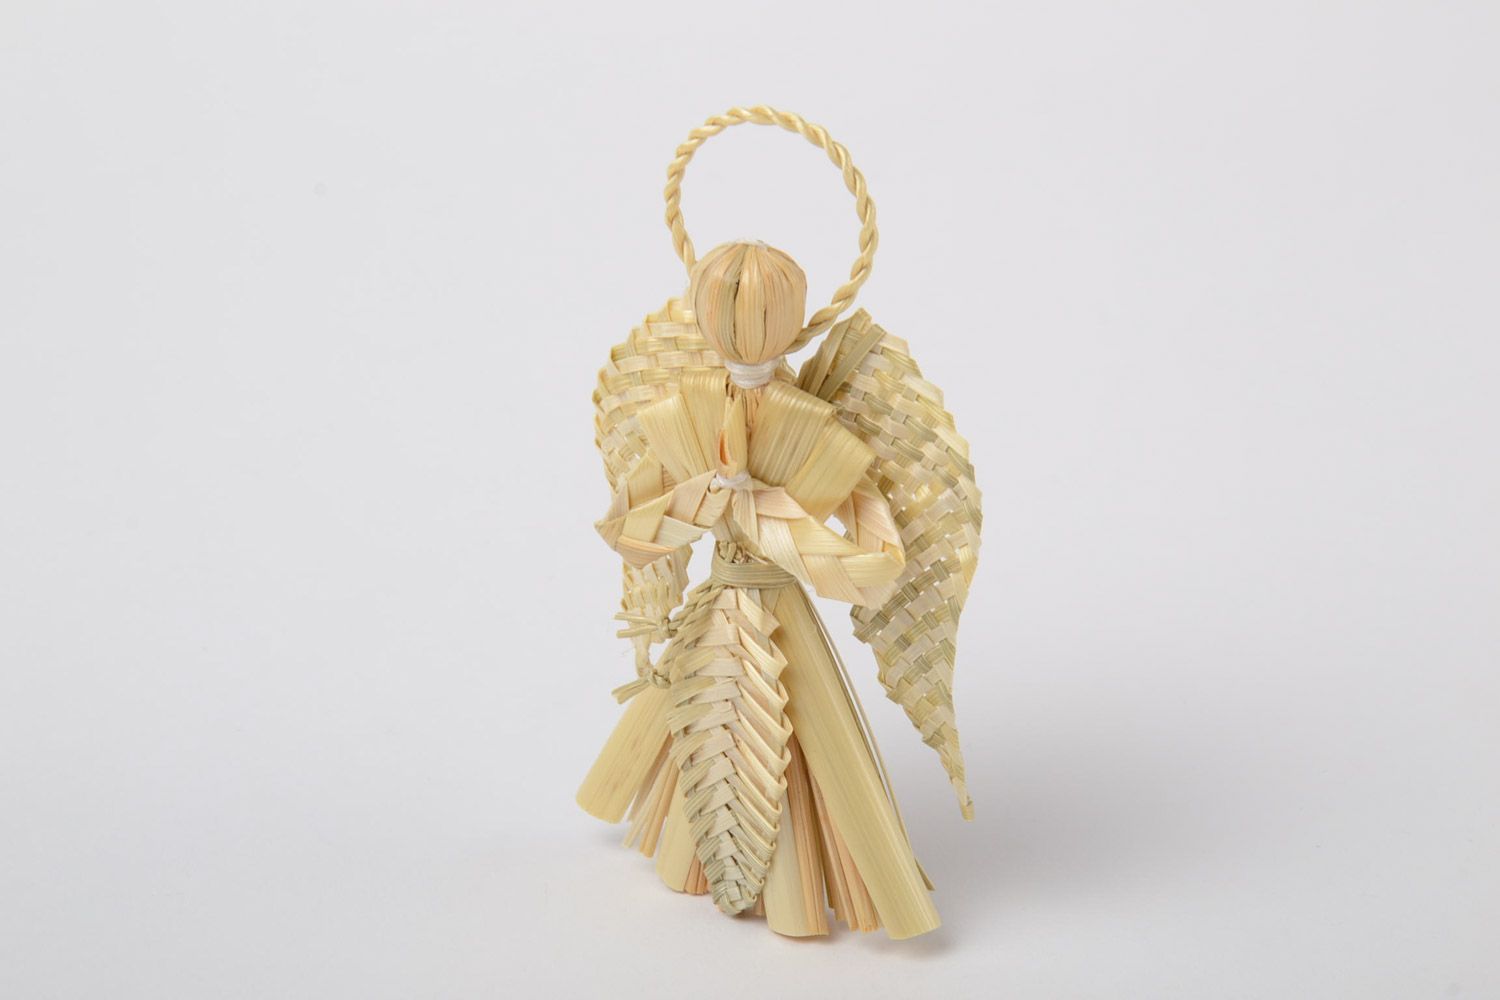 Eco friendly home decoration guardian angel woven of natural straw handmade photo 1